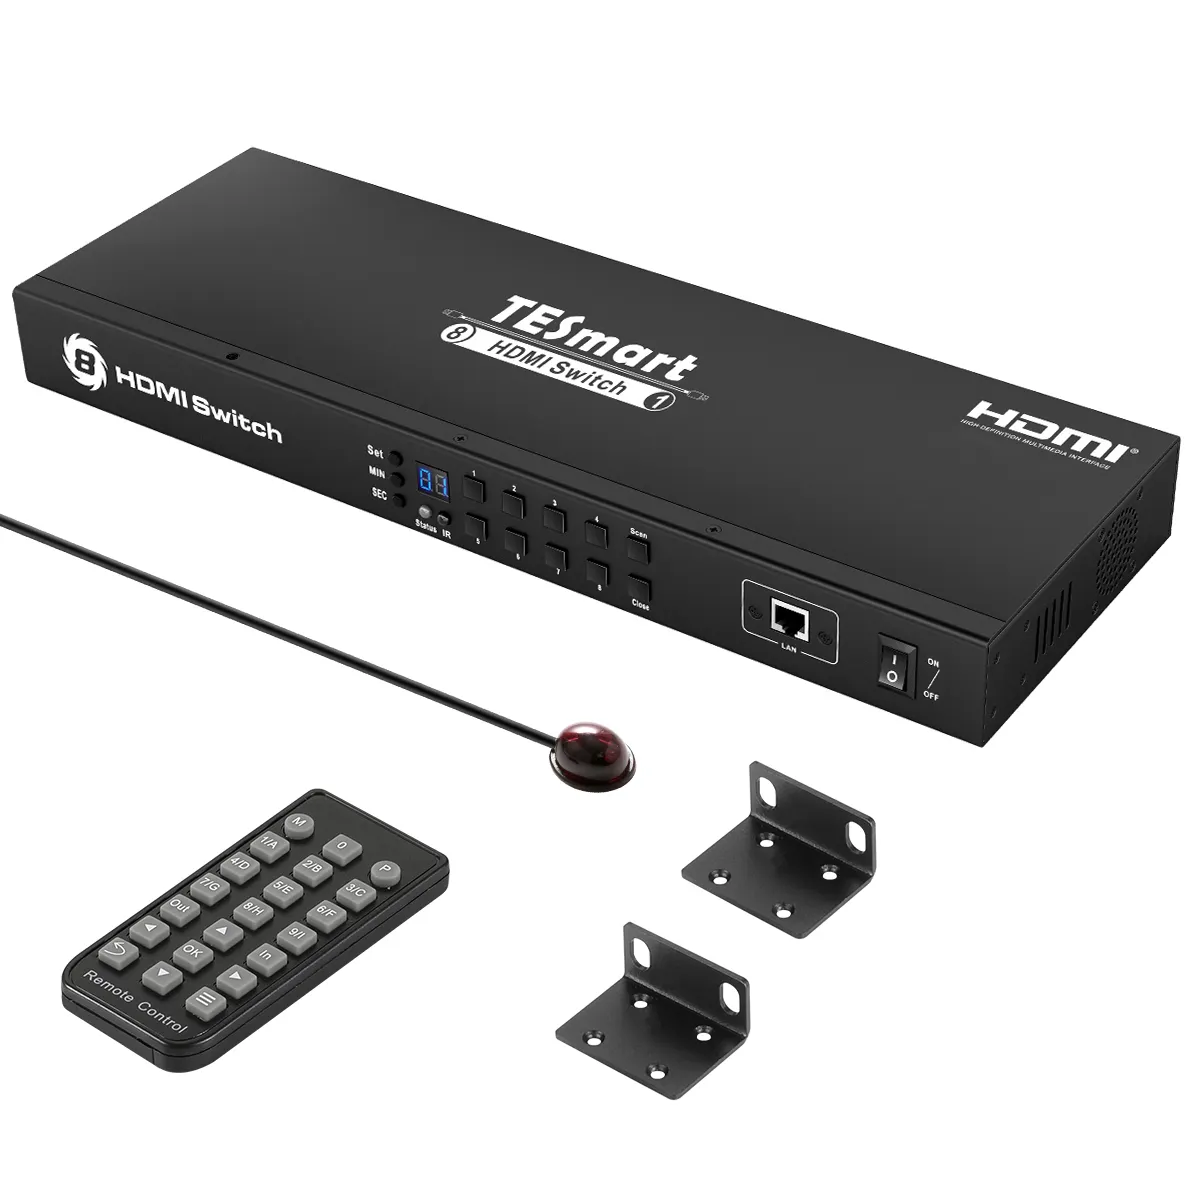 8 In 1 Out HDMI Switch Support RS232 8x1 Switcher HDMI 4K 30Hz With IR Remote